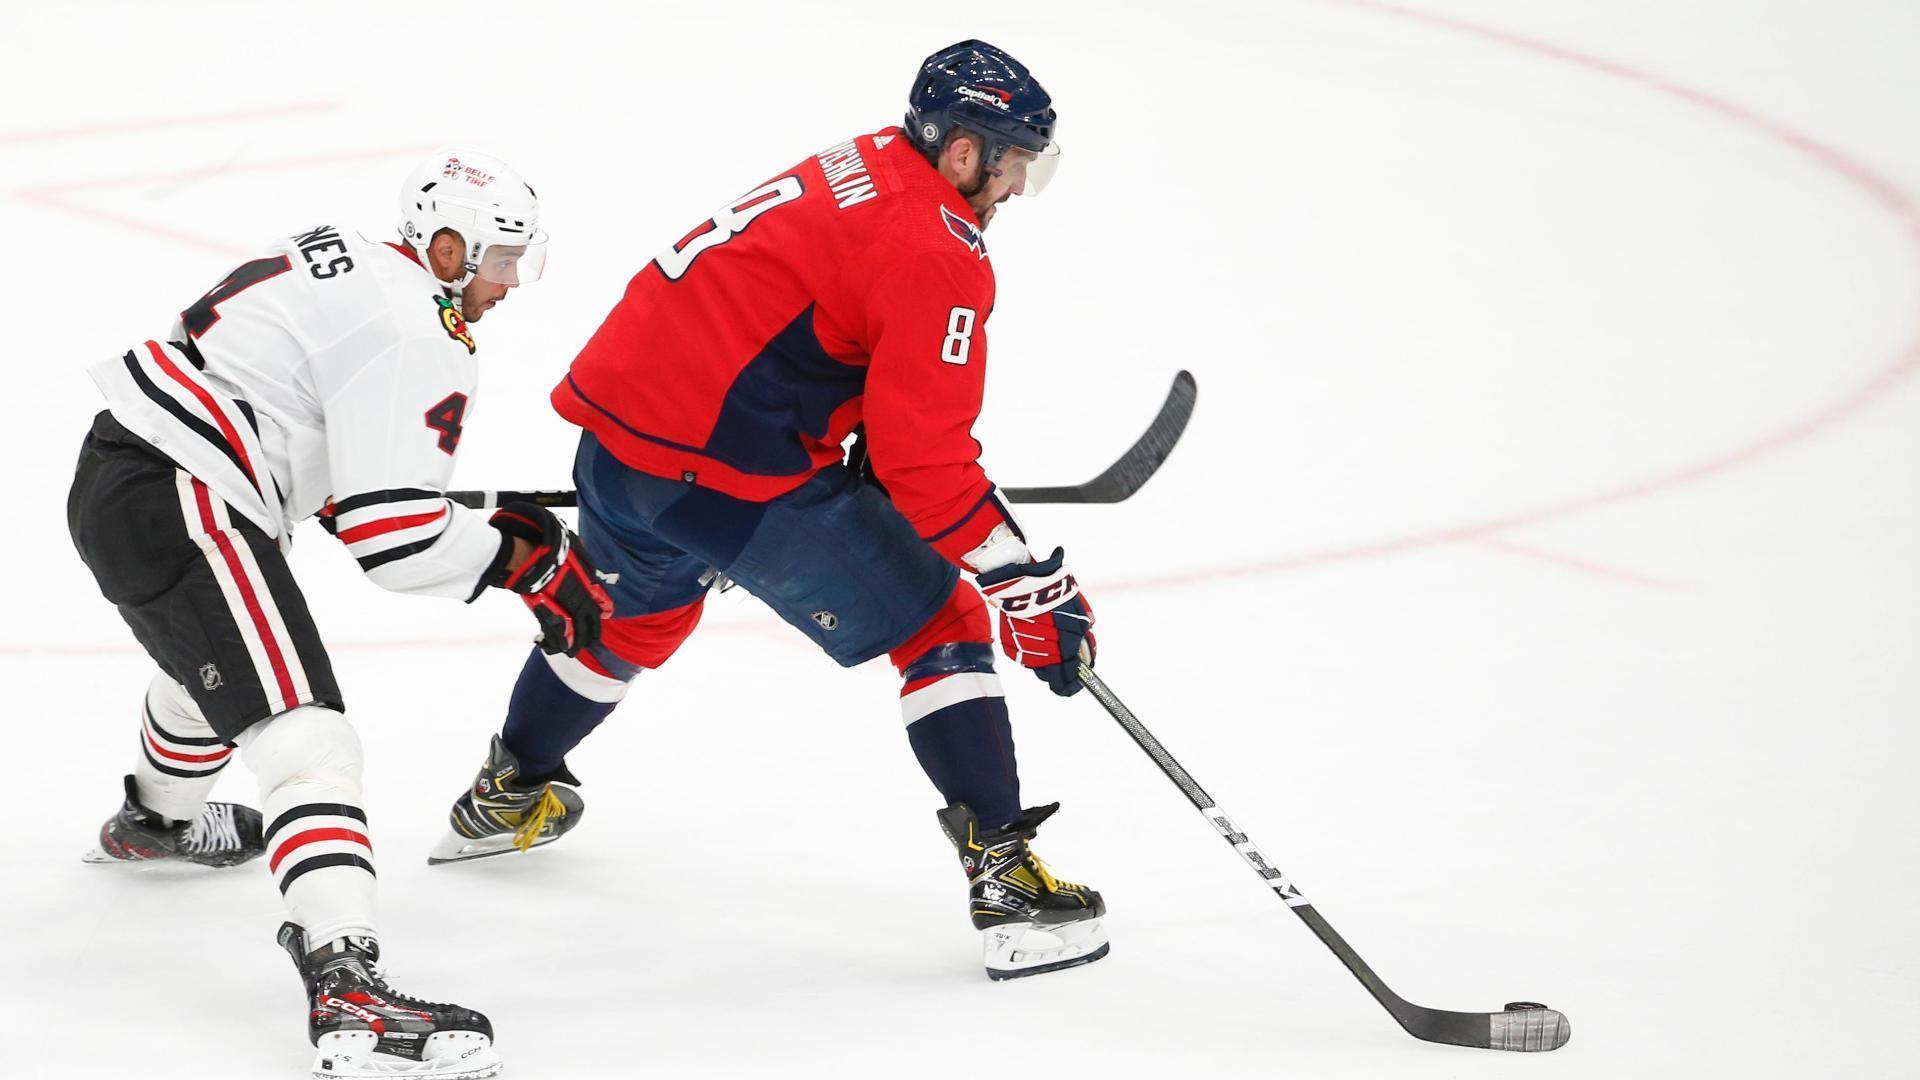 Nicklas Backstrom admitted to being nervous before return